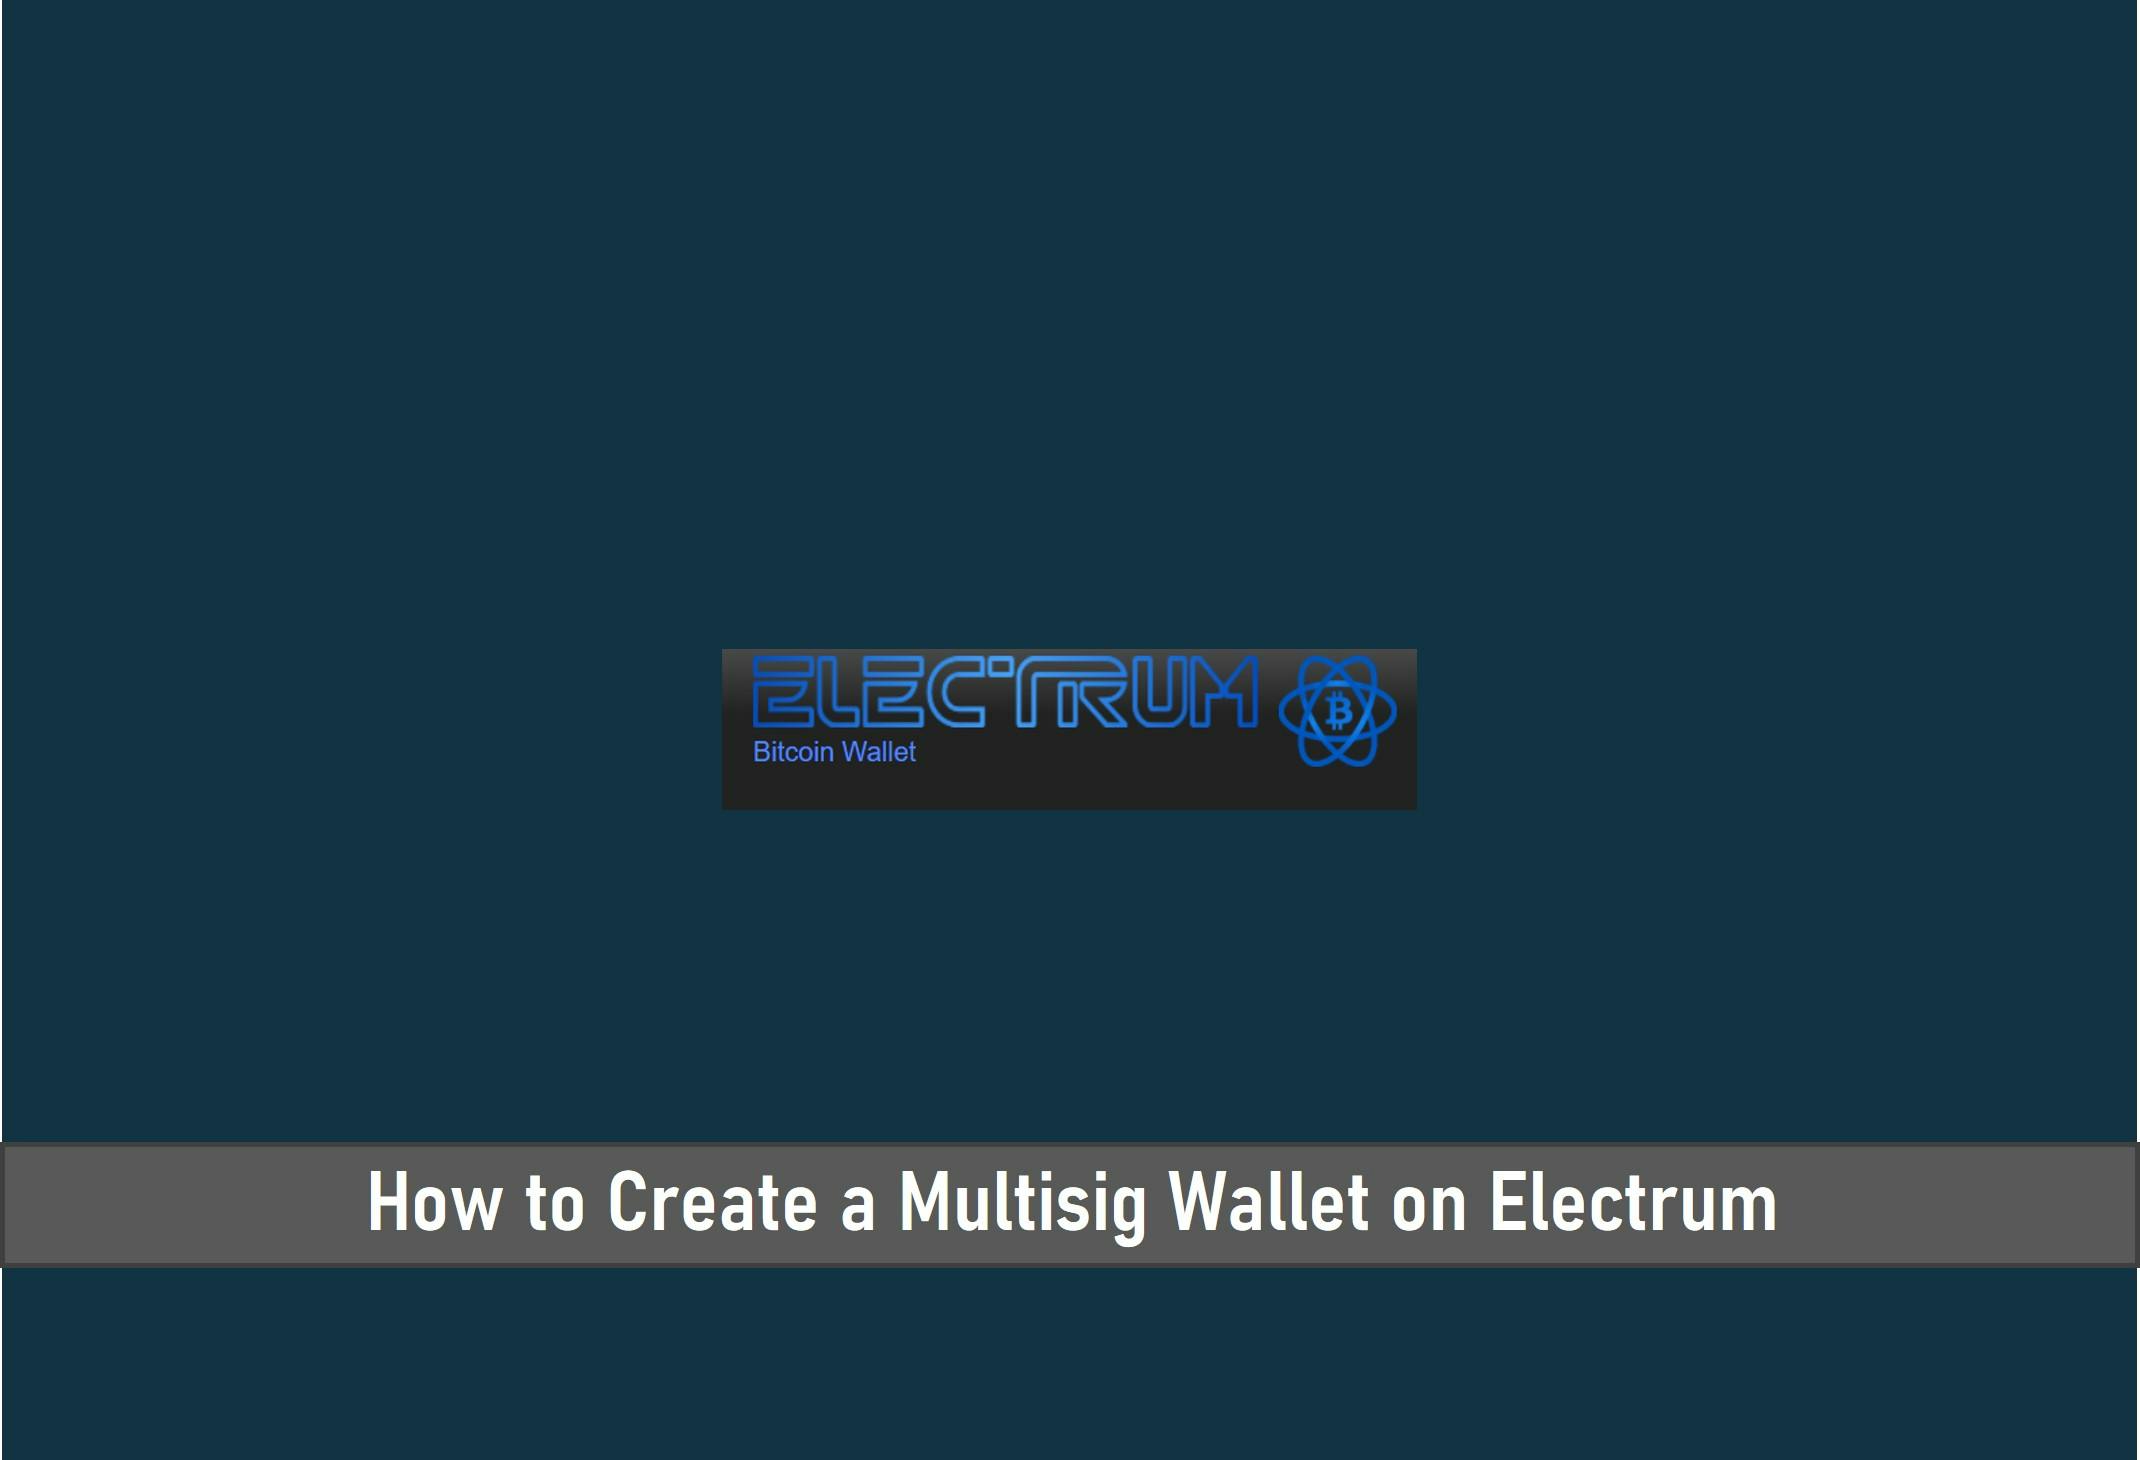 How to Create a Multisig Wallet on Electrum